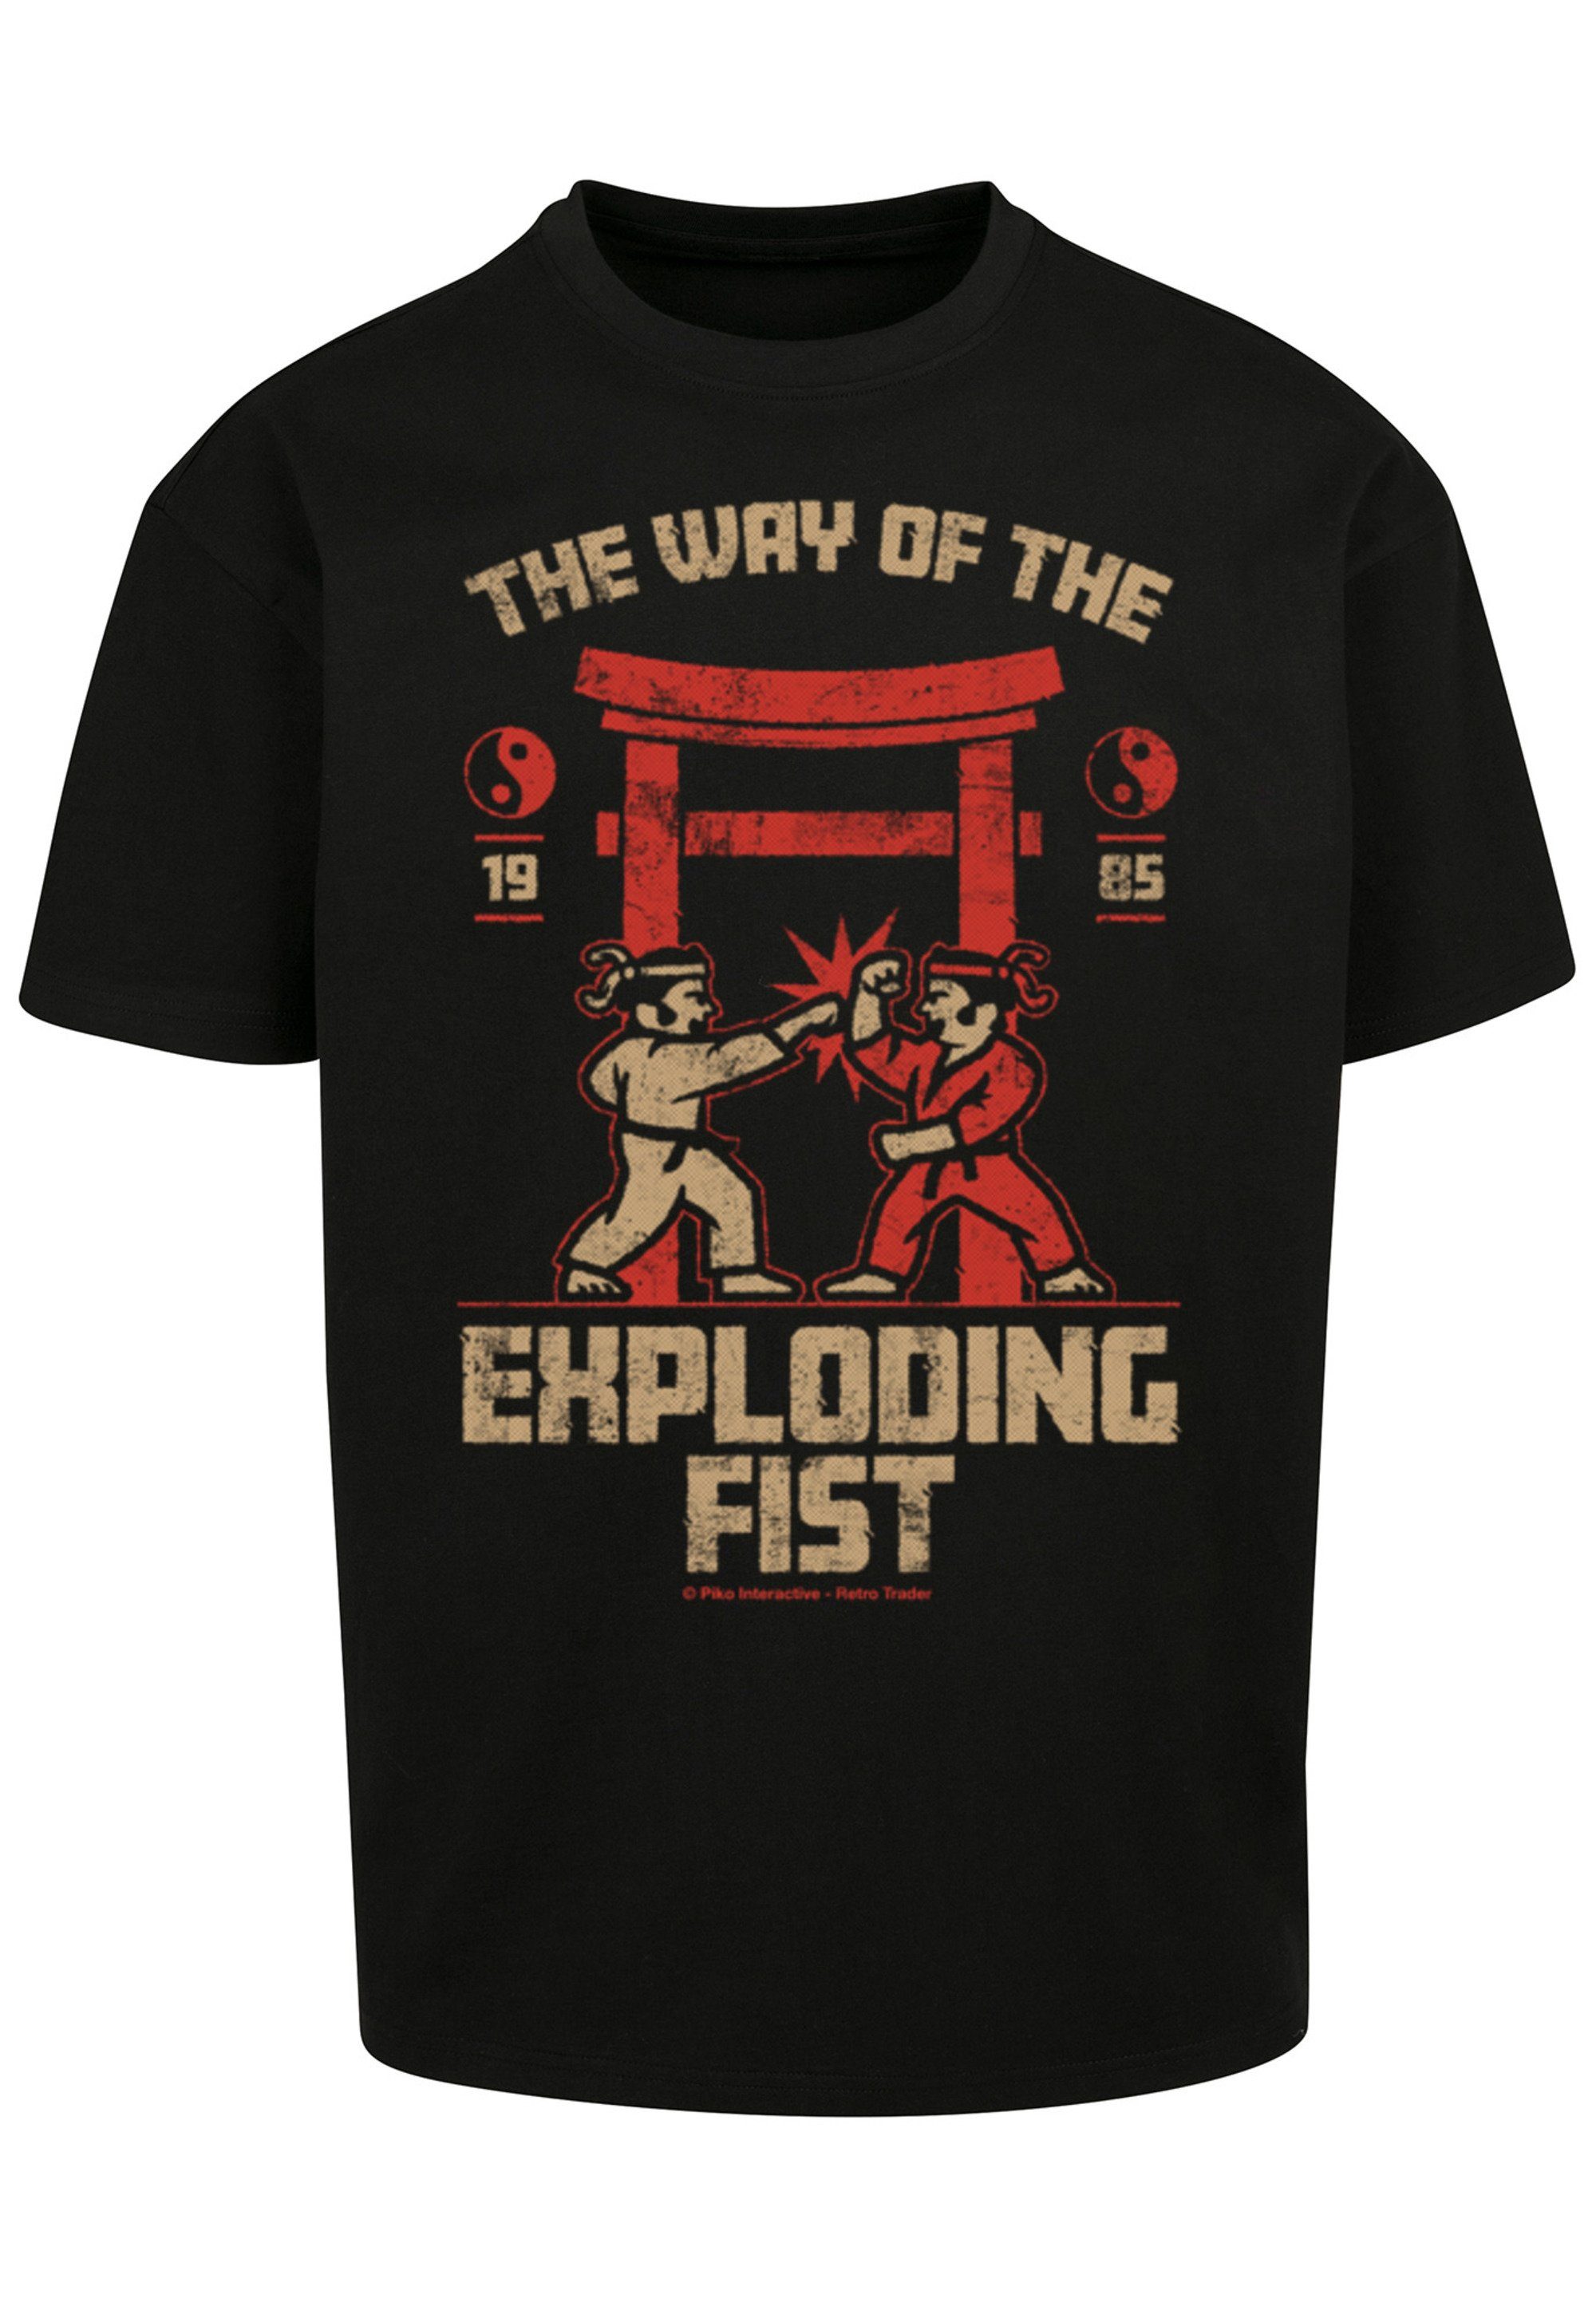 The Of F4NT4STIC Way The SEVENSQUARED Exploding schwarz Retro T-Shirt Gaming Print Fist